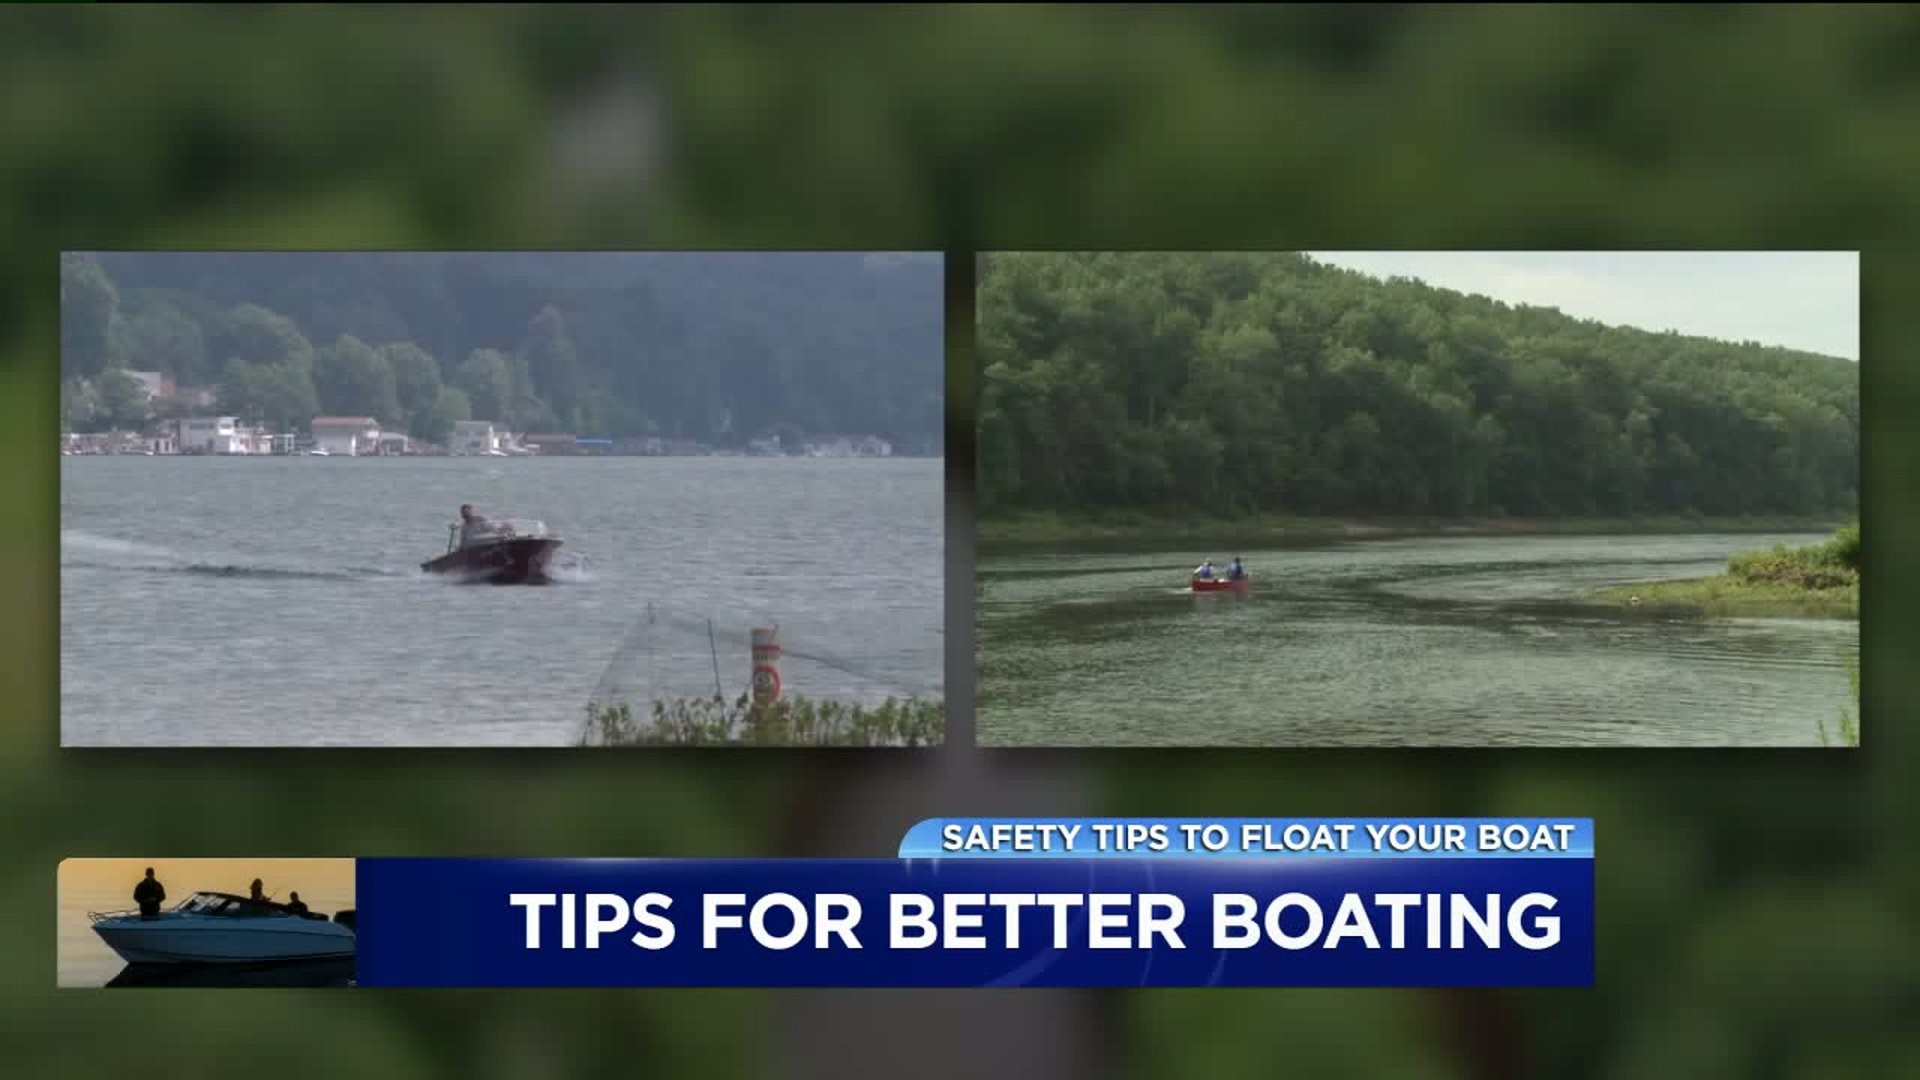 Safety Tips to Float Your Boat